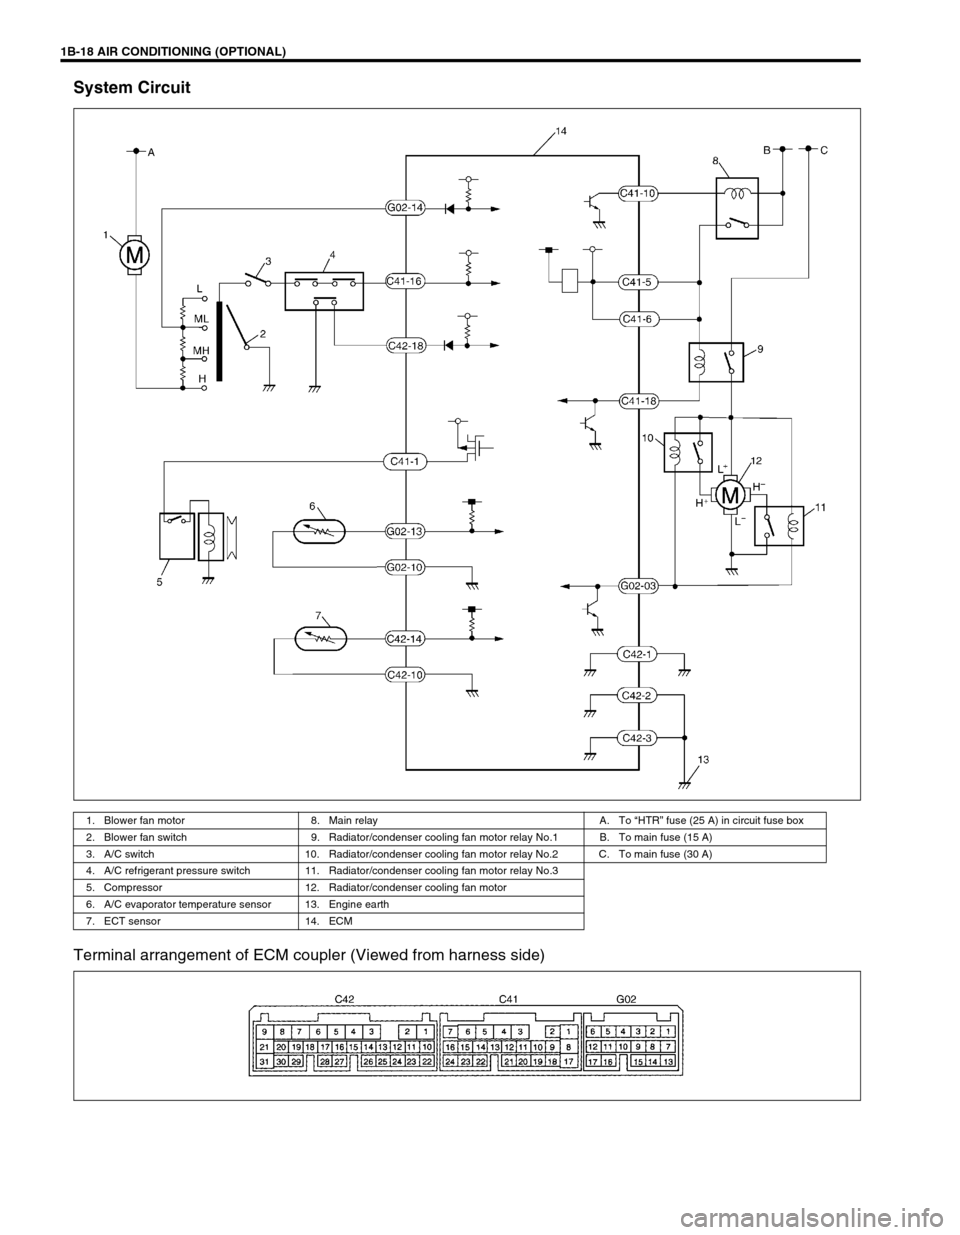 SUZUKI SWIFT 2000 1.G RG413 Service Workshop Manual 1B-18 AIR CONDITIONING (OPTIONAL)
System Circuit
Terminal arrangement of ECM coupler (Viewed from harness side)
1. Blower fan motor 8. Main relay A. To “HTR” fuse (25 A) in circuit fuse box
2. Blo